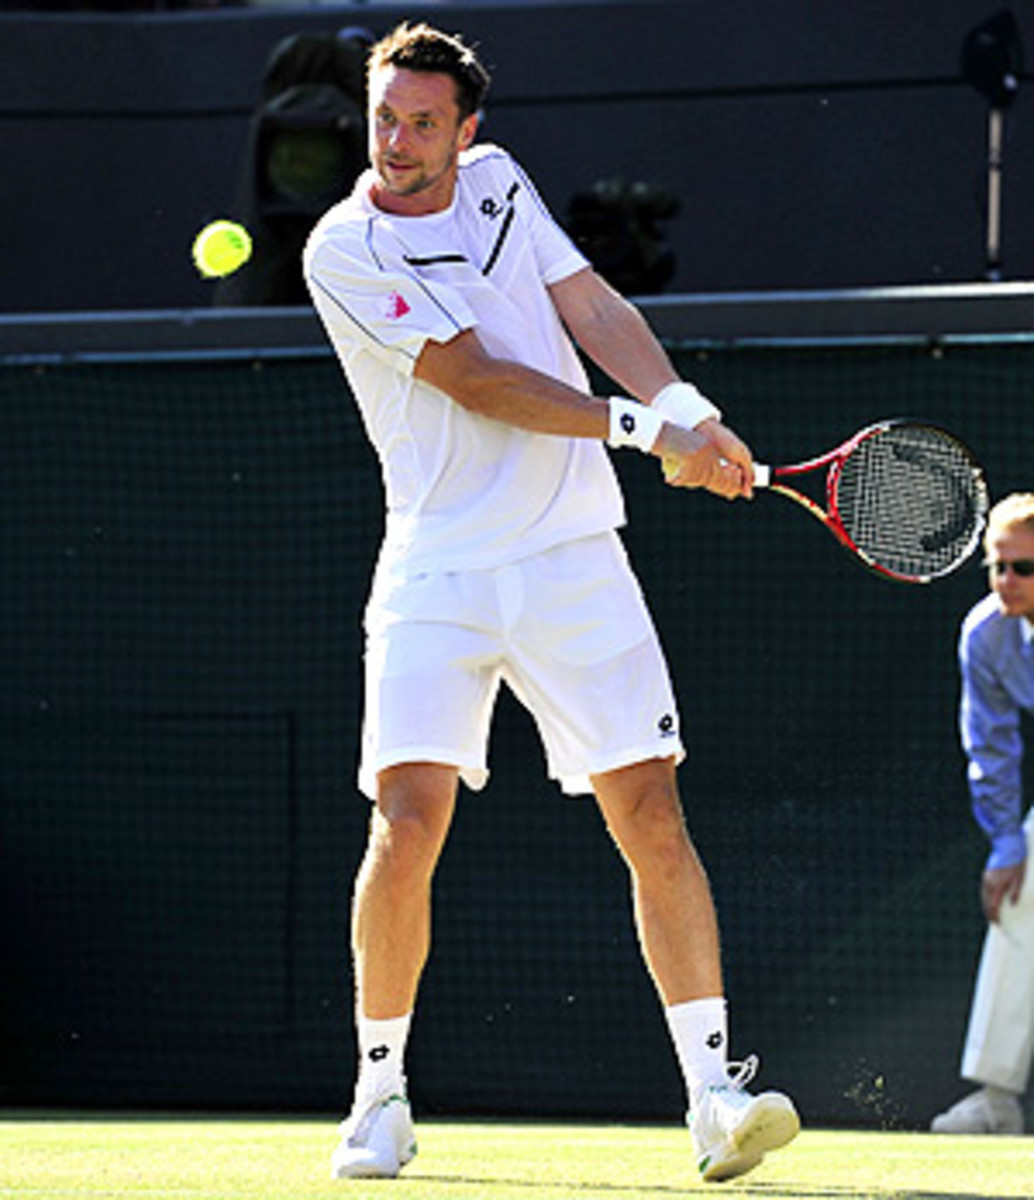 Robin SÃ¶derling lost in the third round of Wimbledon in 2011, played one more event that year and has been absent ever since.